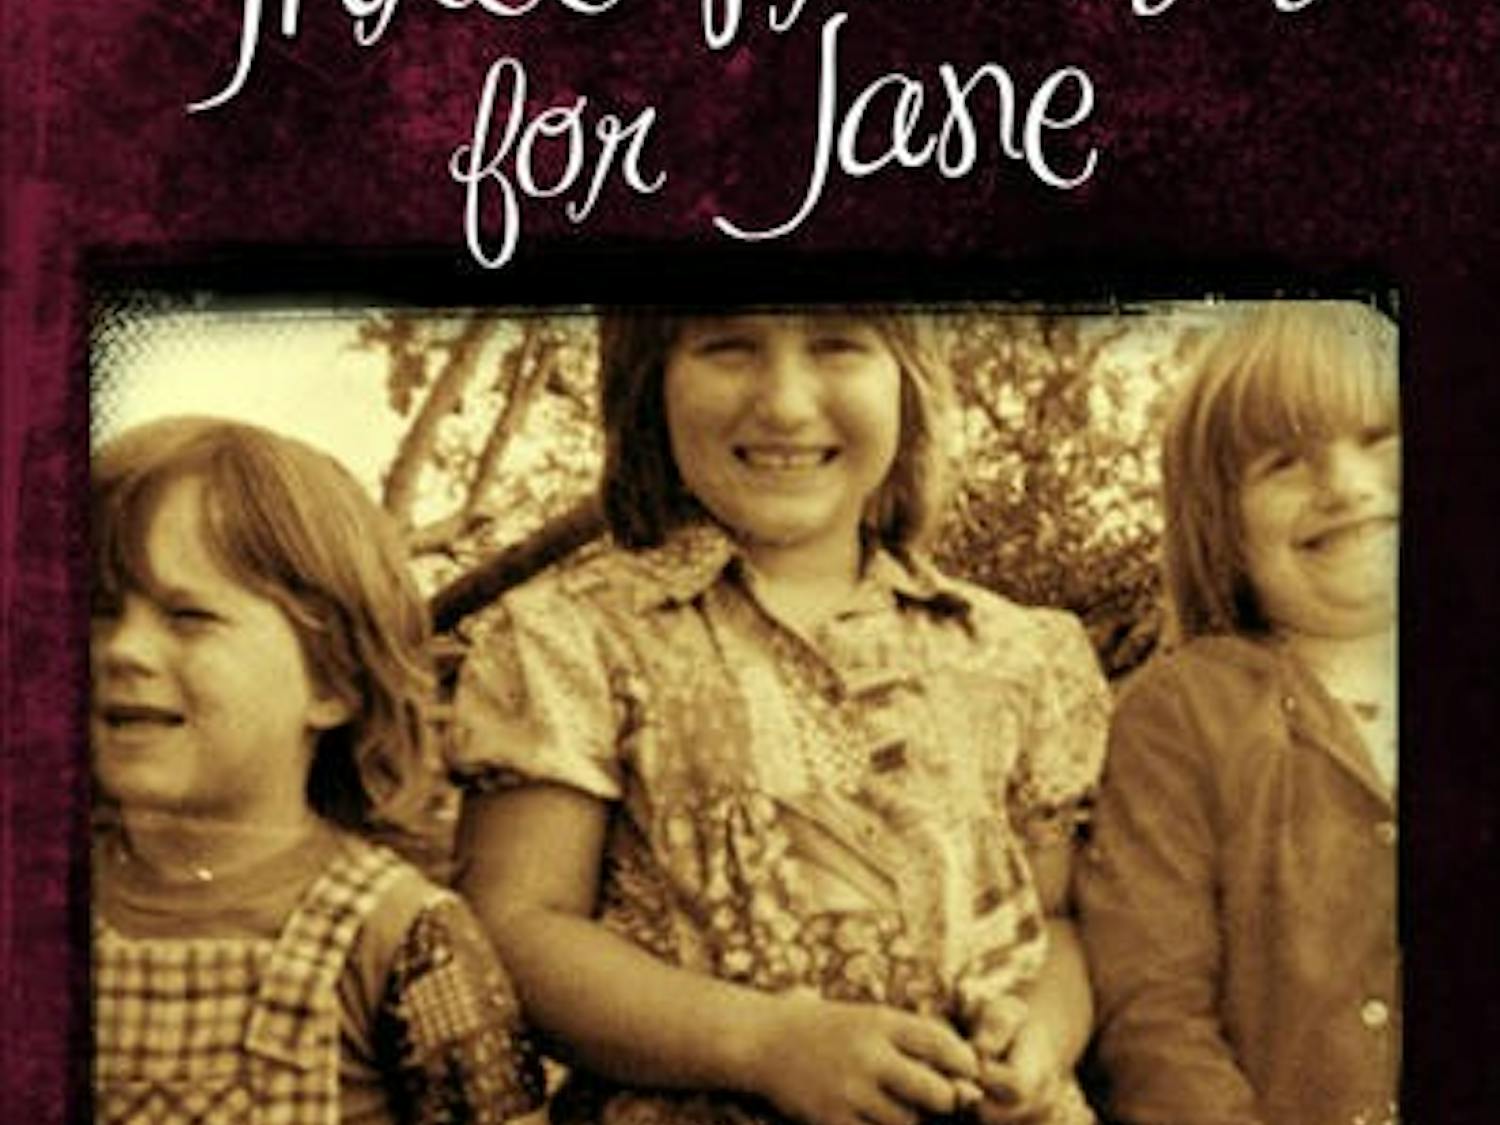 Cover of "Three Promises for Jane: A True Story of Madness and Redemption" by Aerial Liese.  Photo courtesy of Aerial Liese jwigelsworth@abqjournal.com Tue Aug 25 15:27:06 -0600 2015 1440538025 FILENAME: 197988.jpg